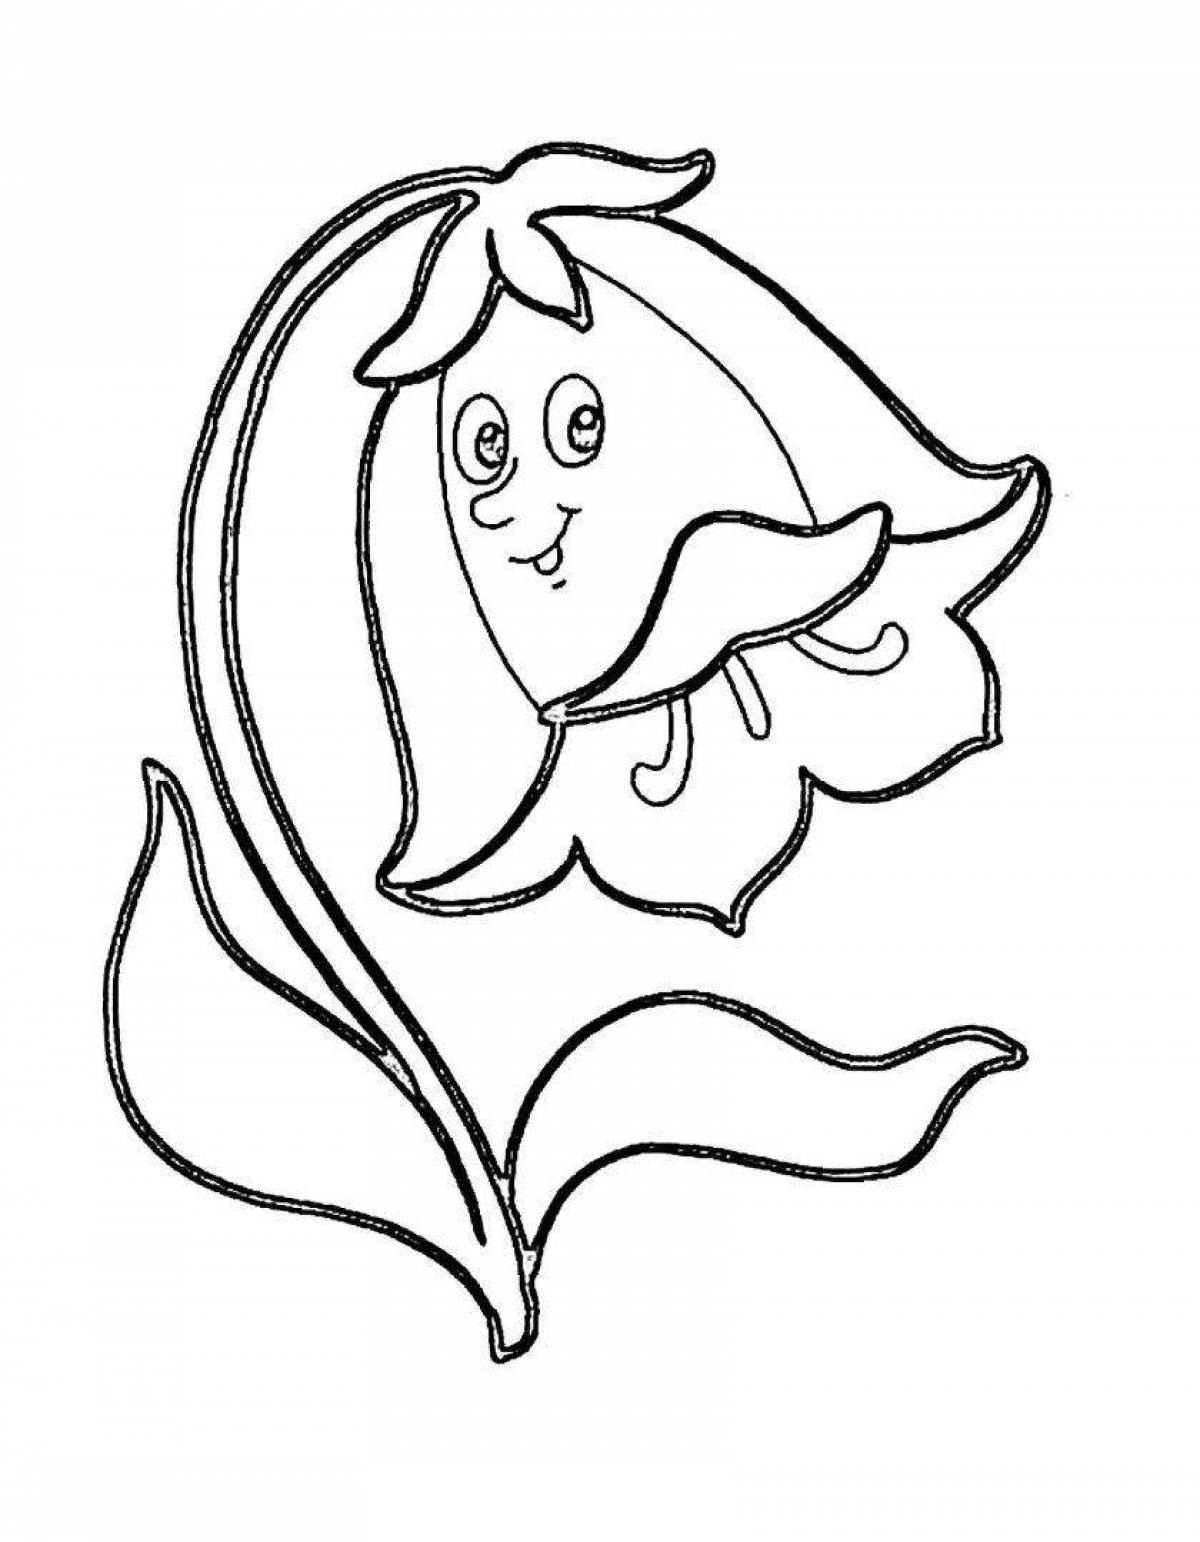 Coloring page amazing flower bell